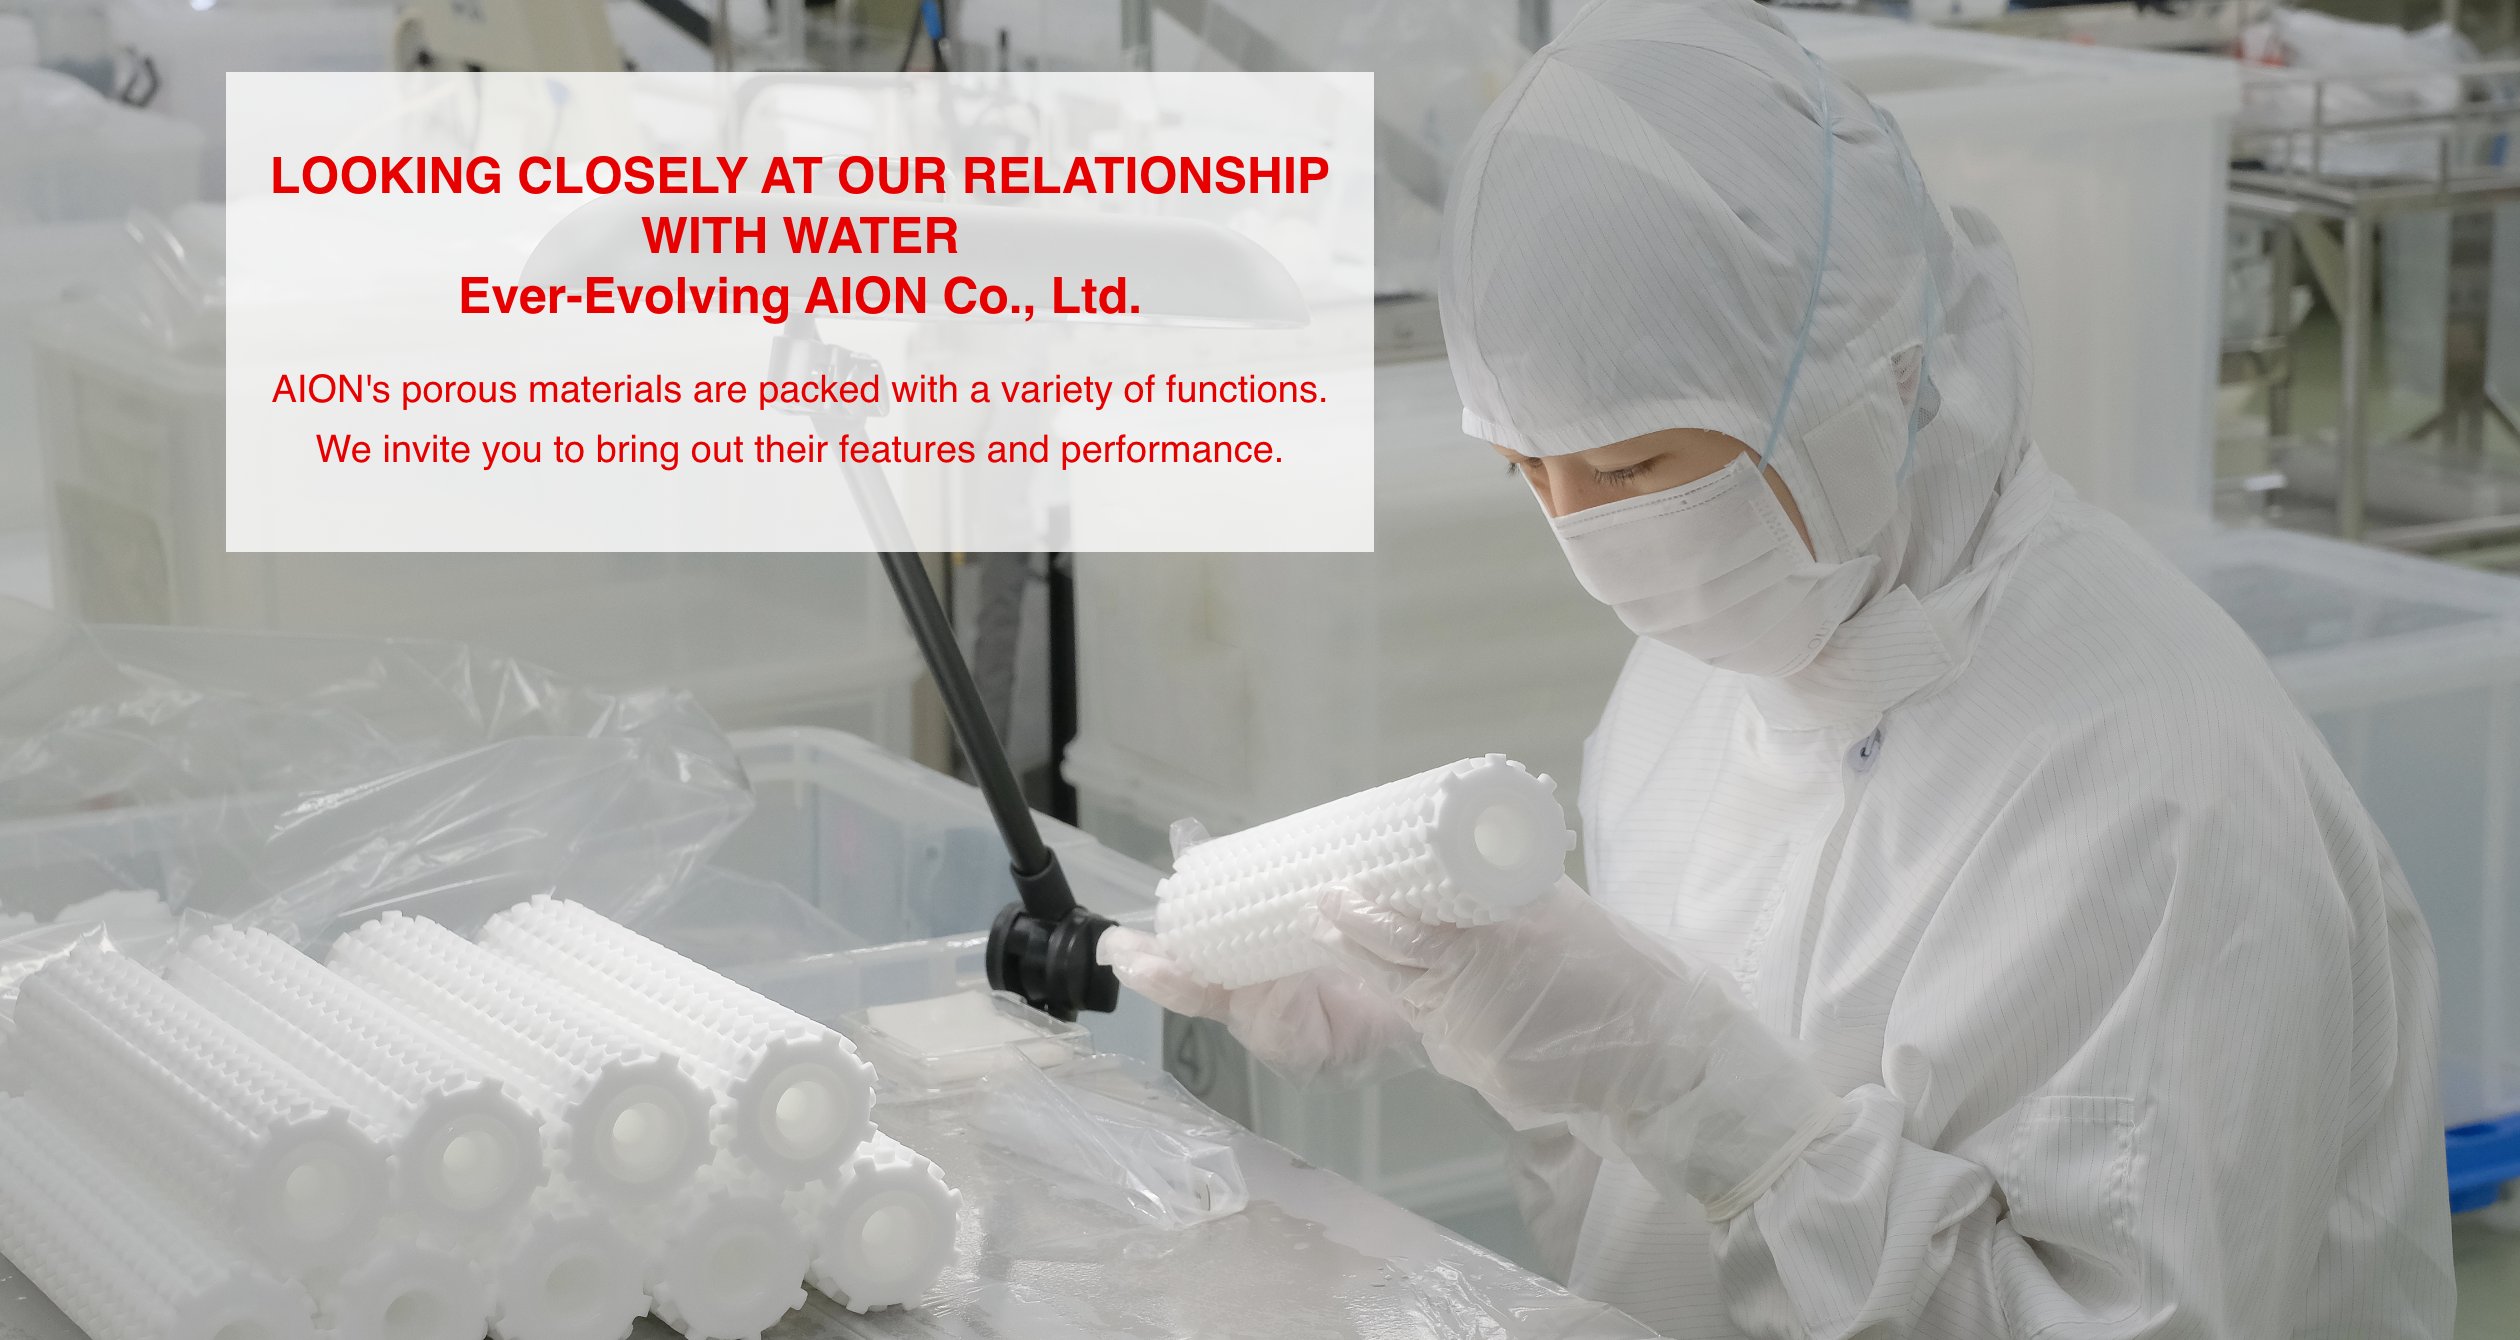 LOOKING CLOSELY AT OUR RELATIONSHIP WITH WATER Ever-Evolving AION Co., Ltd. AION's porous materials are packed with a variety of functions. We invite you to bring out their features and performance.